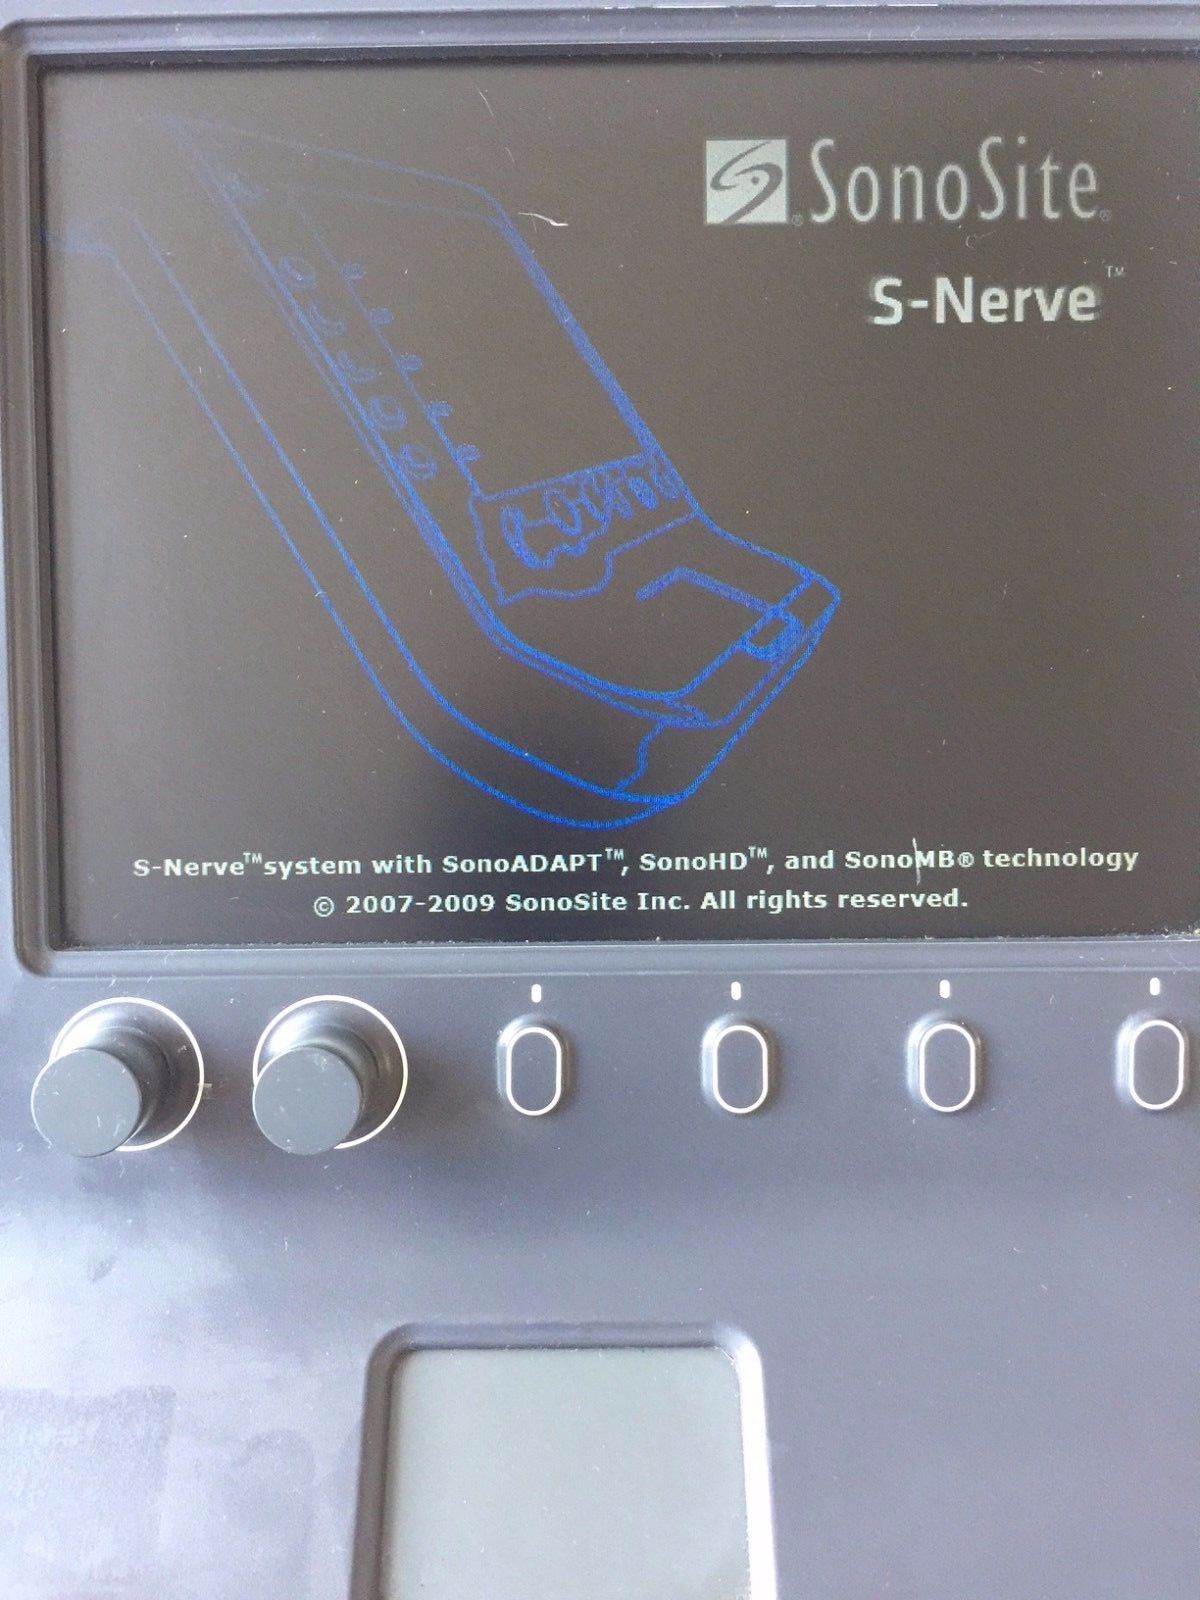 Ultrasound Sonosite S-Nerve DOM 2008 with Power Supply DIAGNOSTIC ULTRASOUND MACHINES FOR SALE